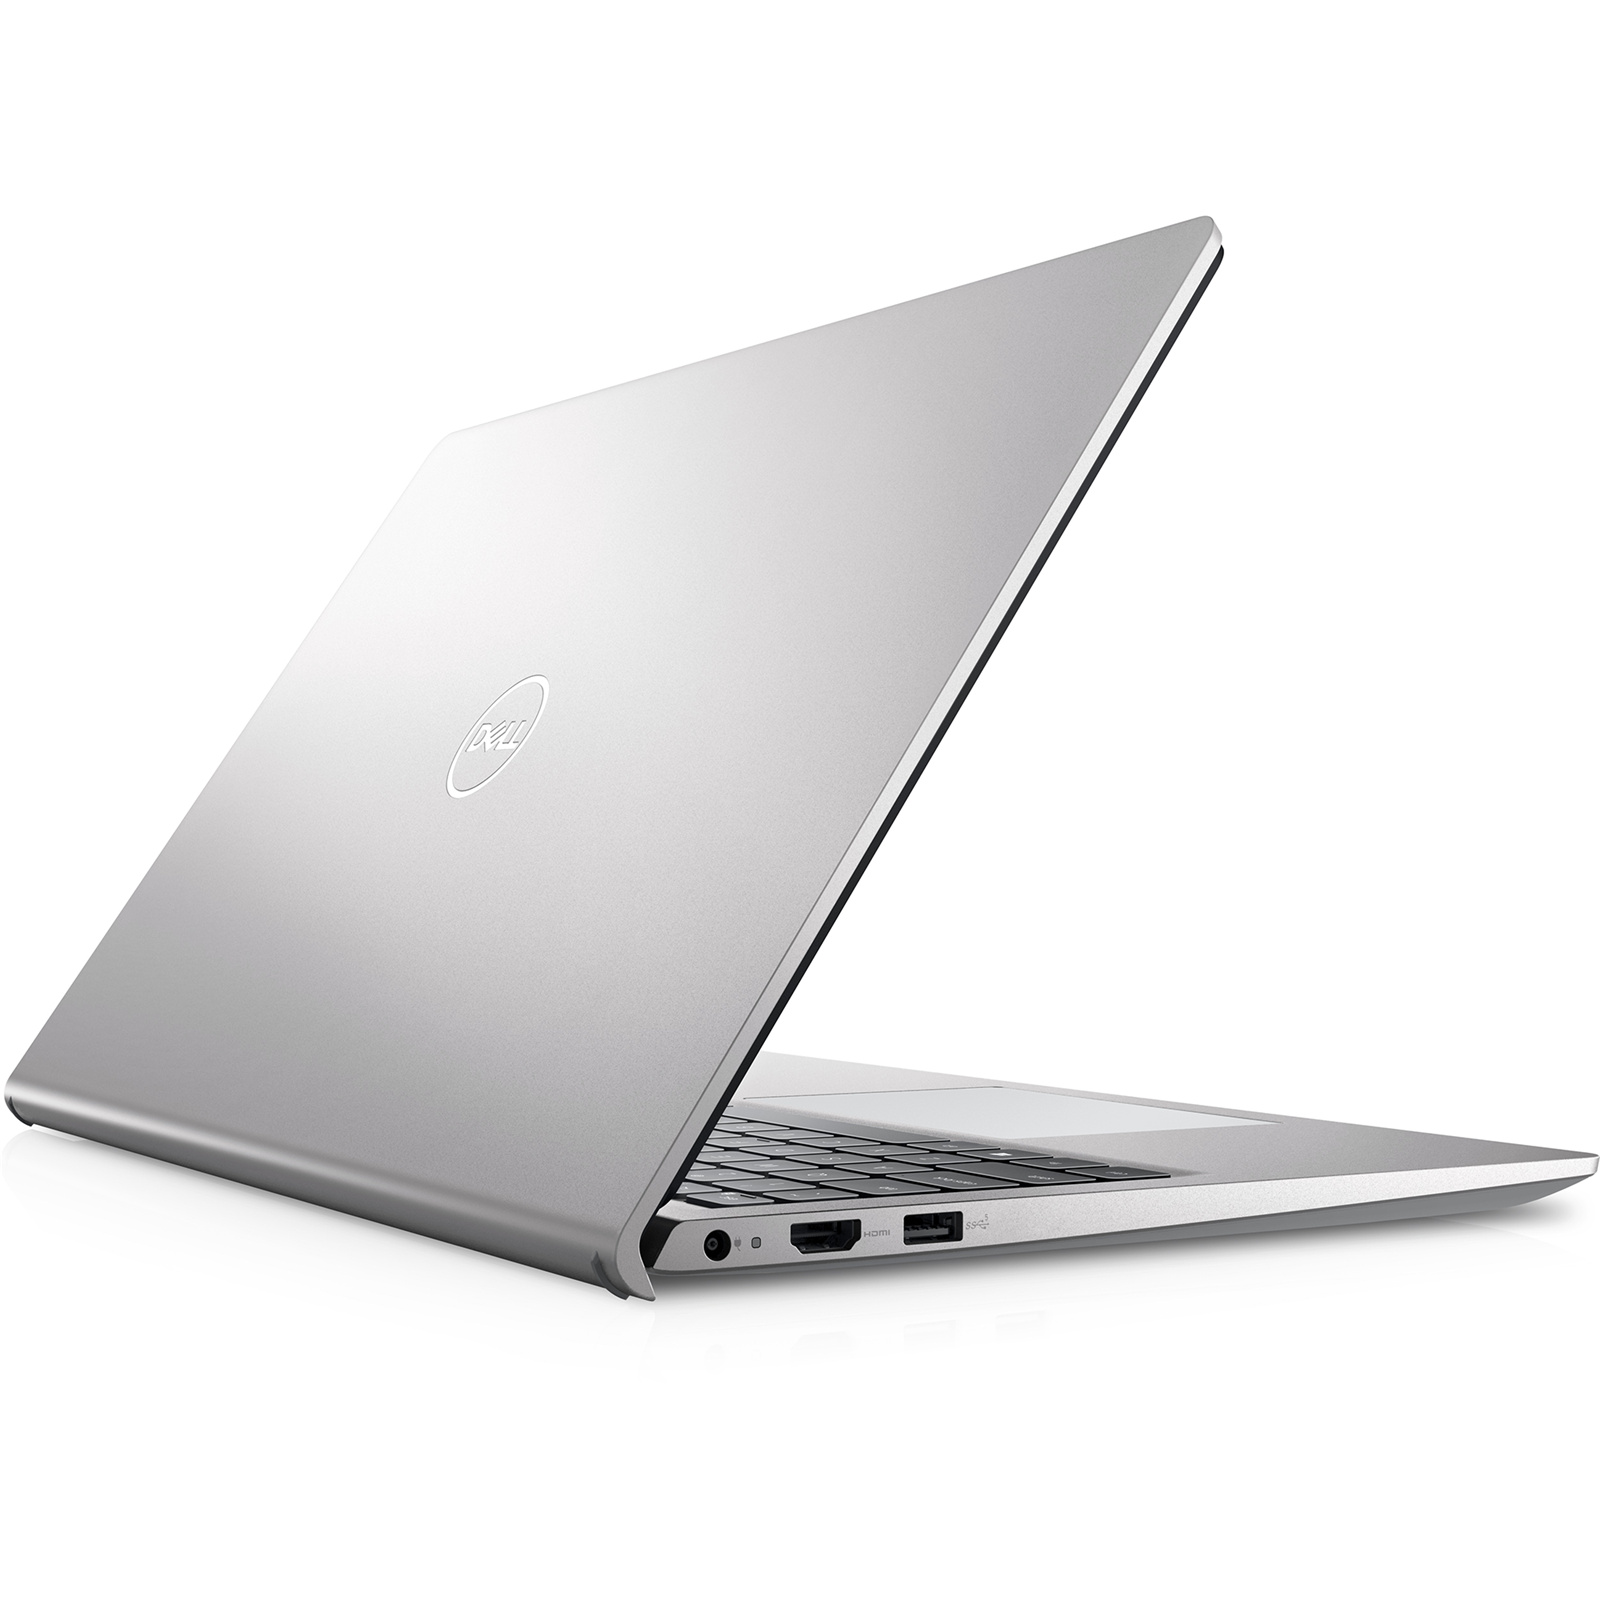 Buy the Dell Inspiron 15 3520 15.6" FHD Laptop Intel Core i5-1135G7 - 8GB  RAM ... ( IN352041C4J001OMNZH ) online - PBTech.com/au